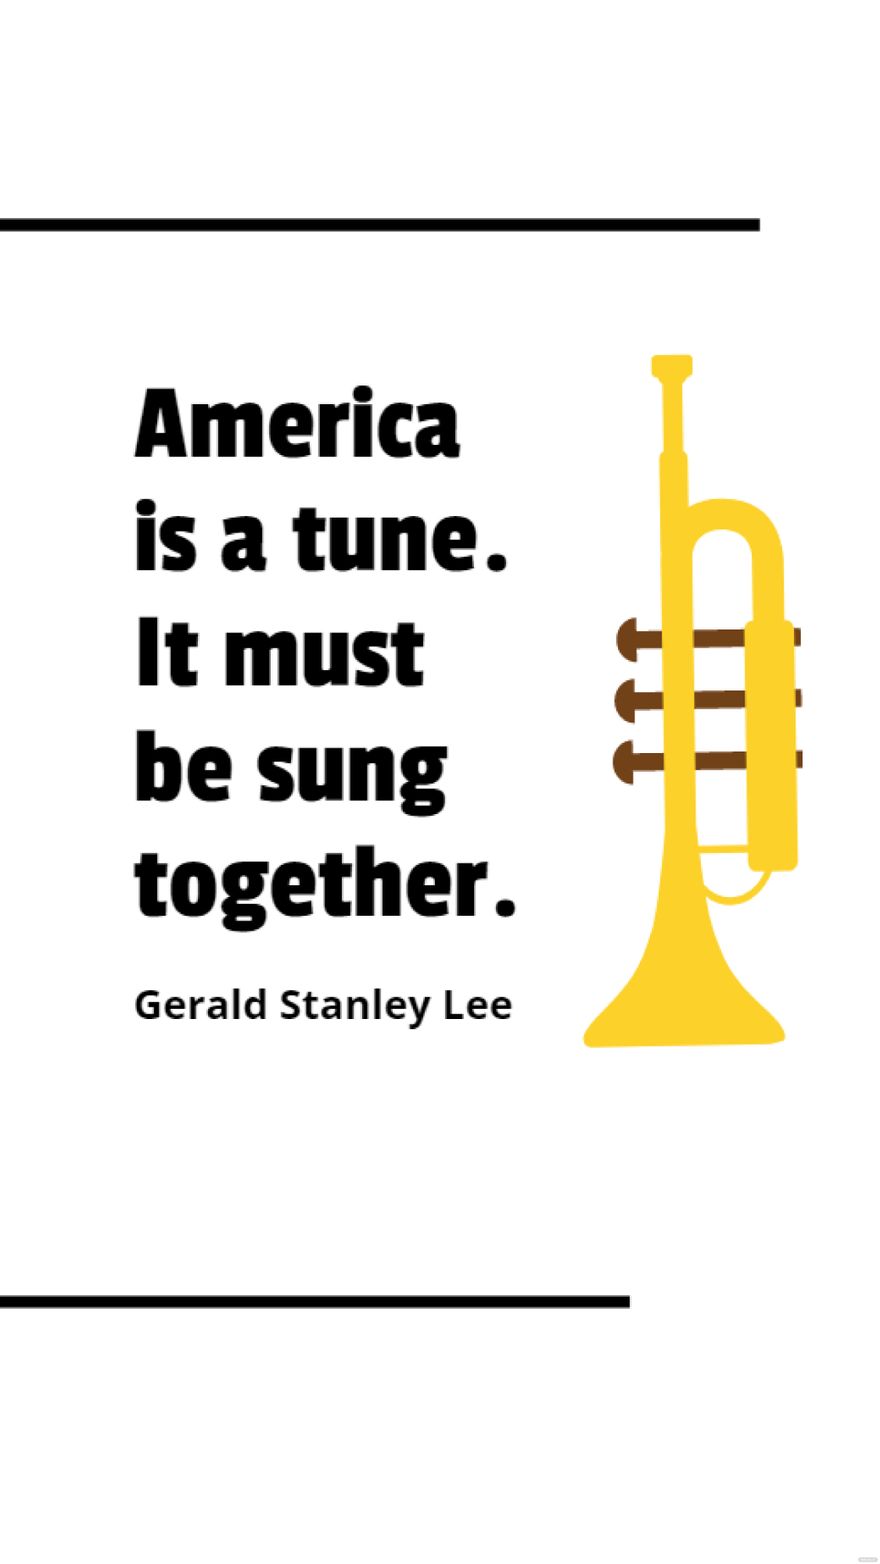 Gerald Stanley Lee -  America is a tune. It must be sung together in JPG